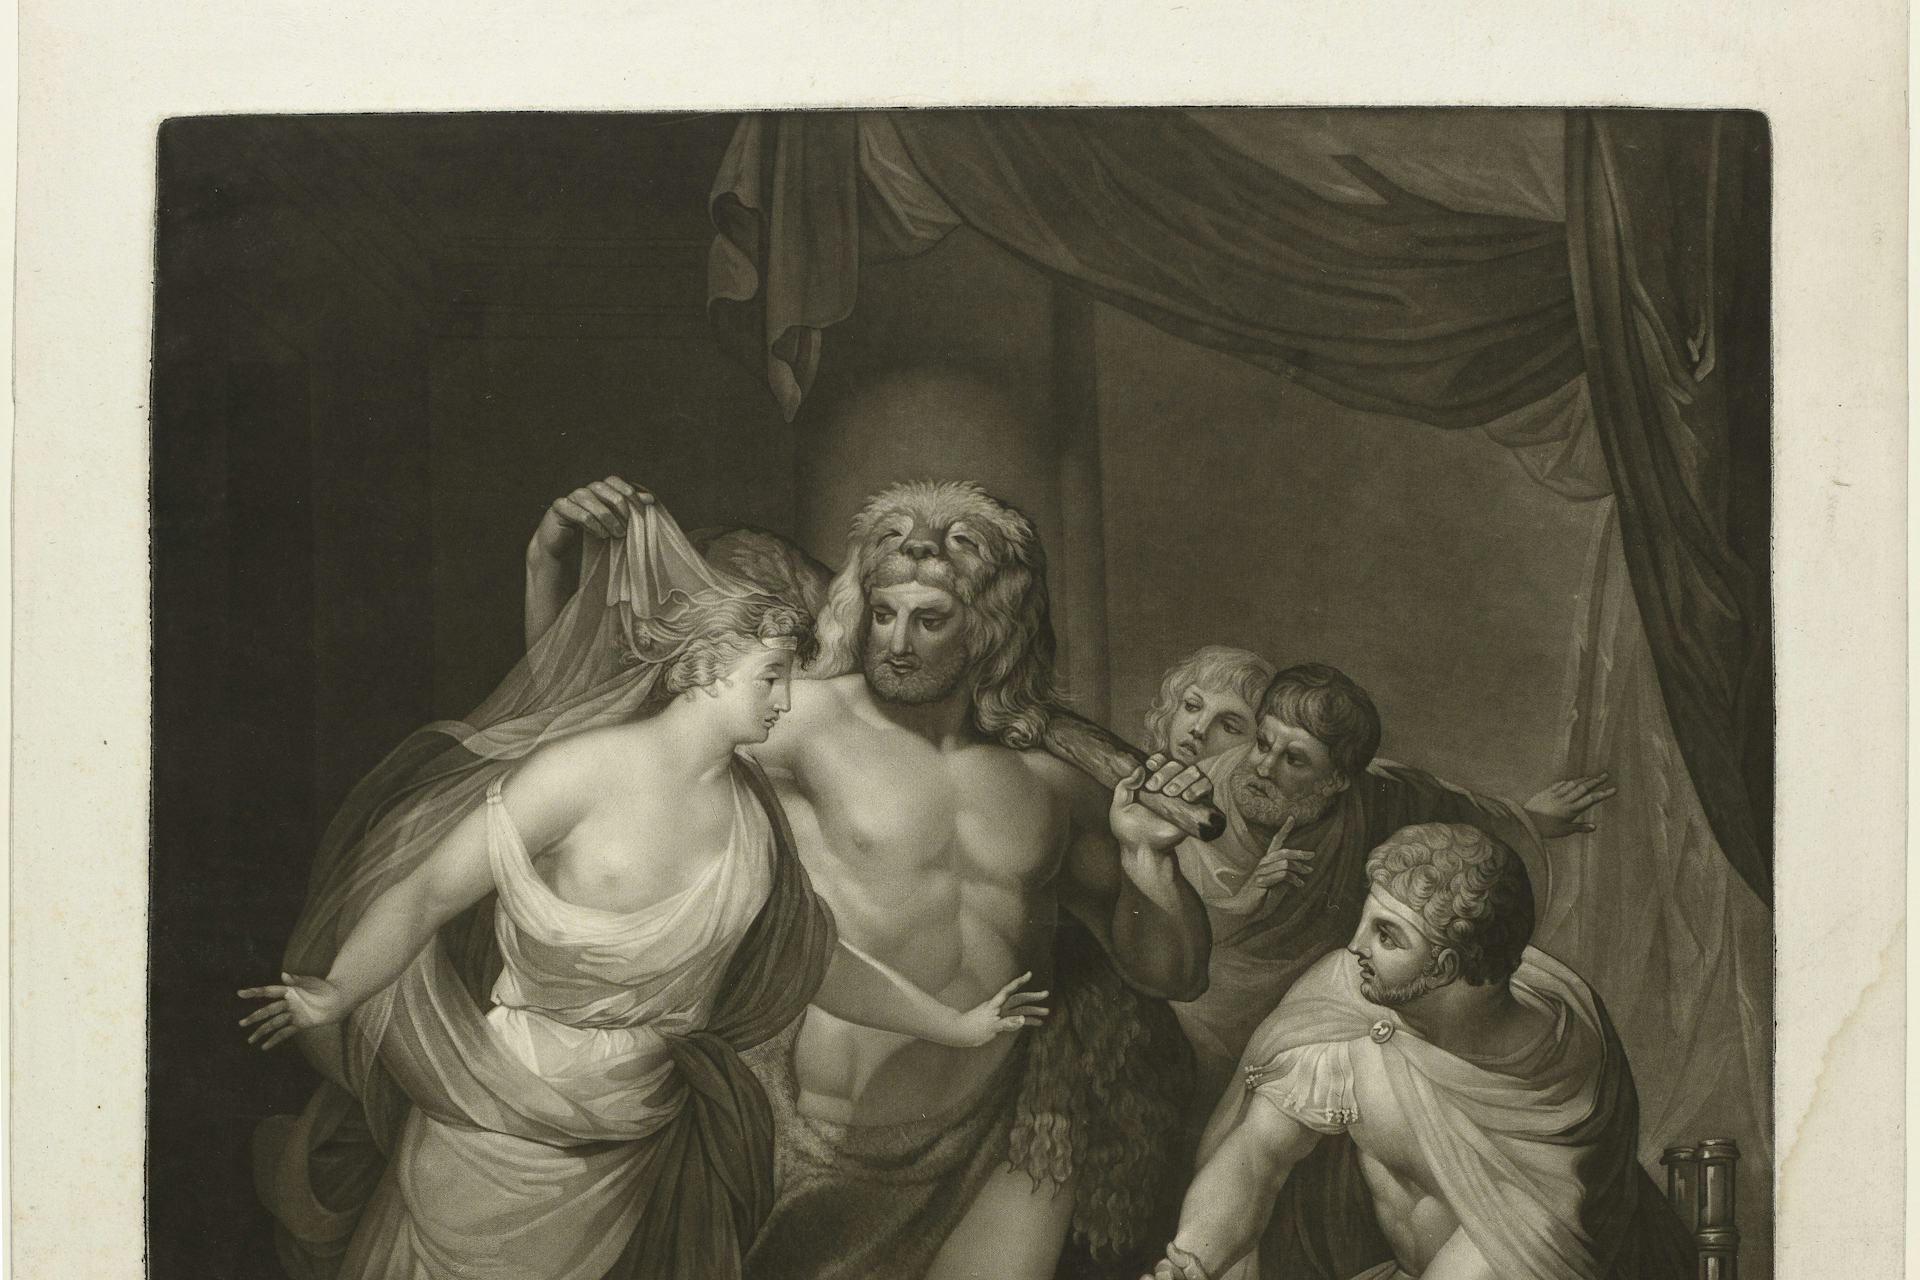 Hercules Brings Alcestis back from the Underworld by Joseph Spiegl, after Anton Wolff